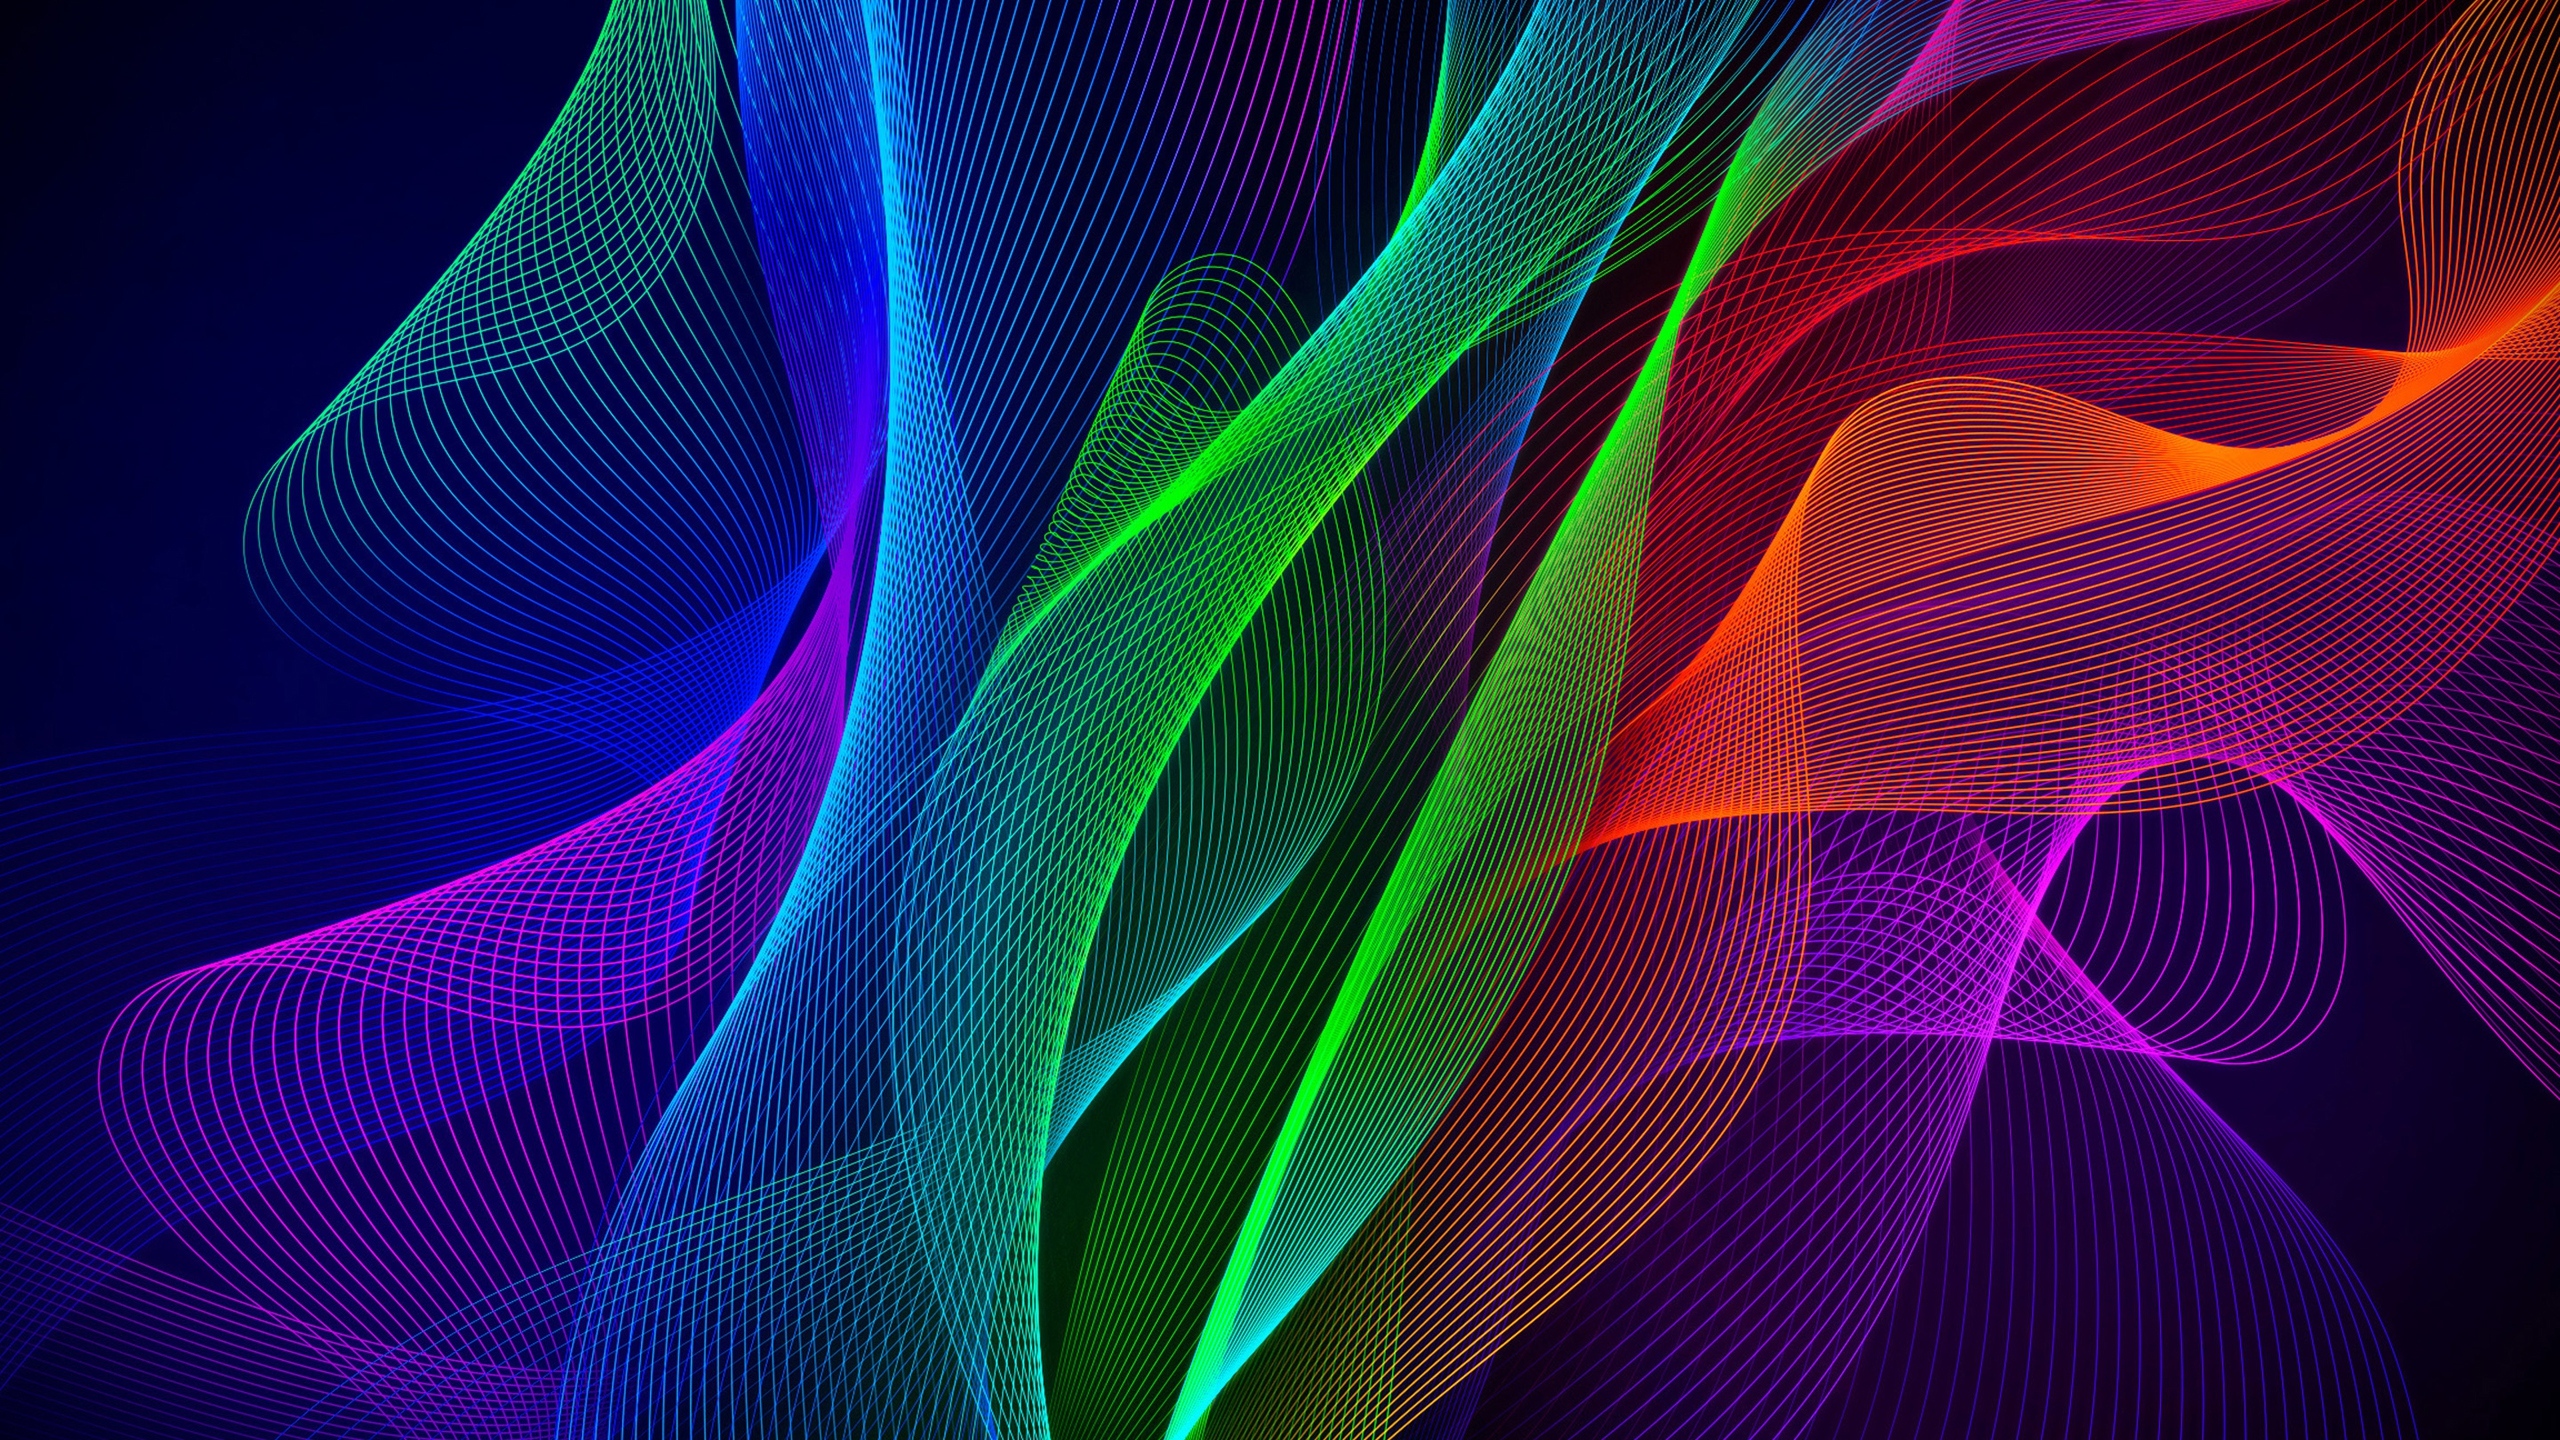 Wallpaper Colorful Waves, Rainbow, Wavy, Abstraction, Illusion:2560x1440